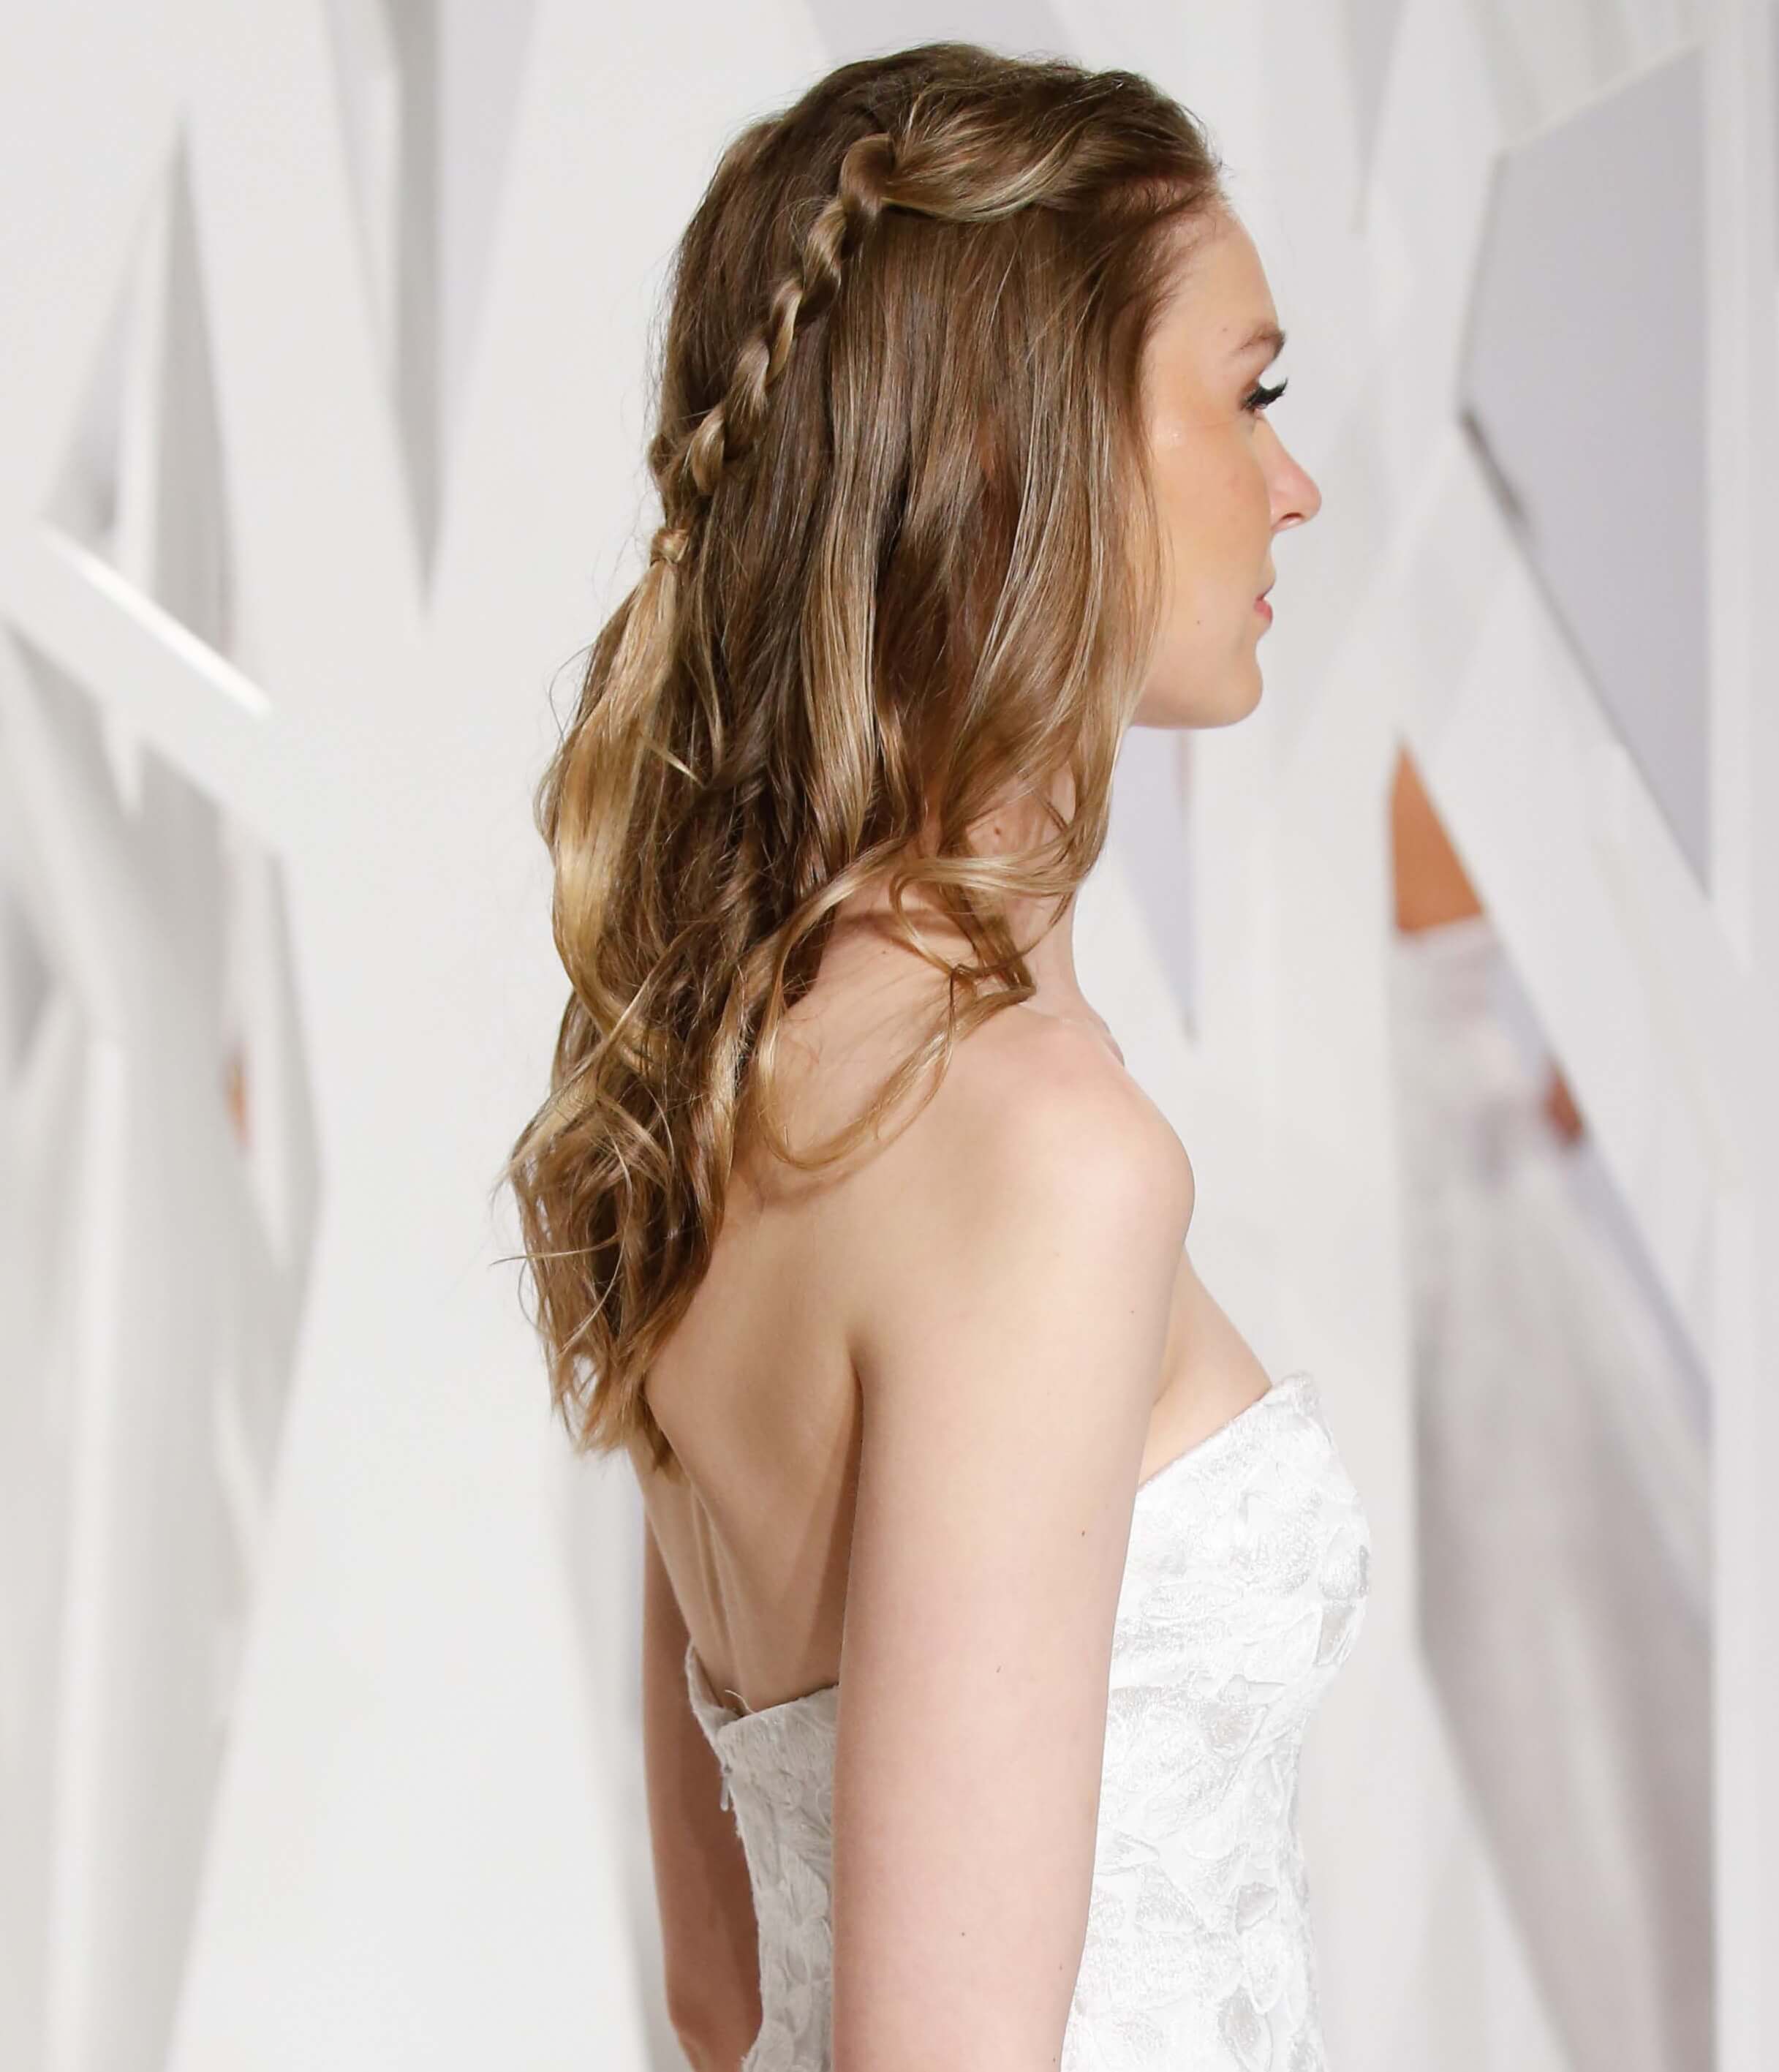 easy wedding style for curly hair: A blonde curly half-up twisted hairstyle